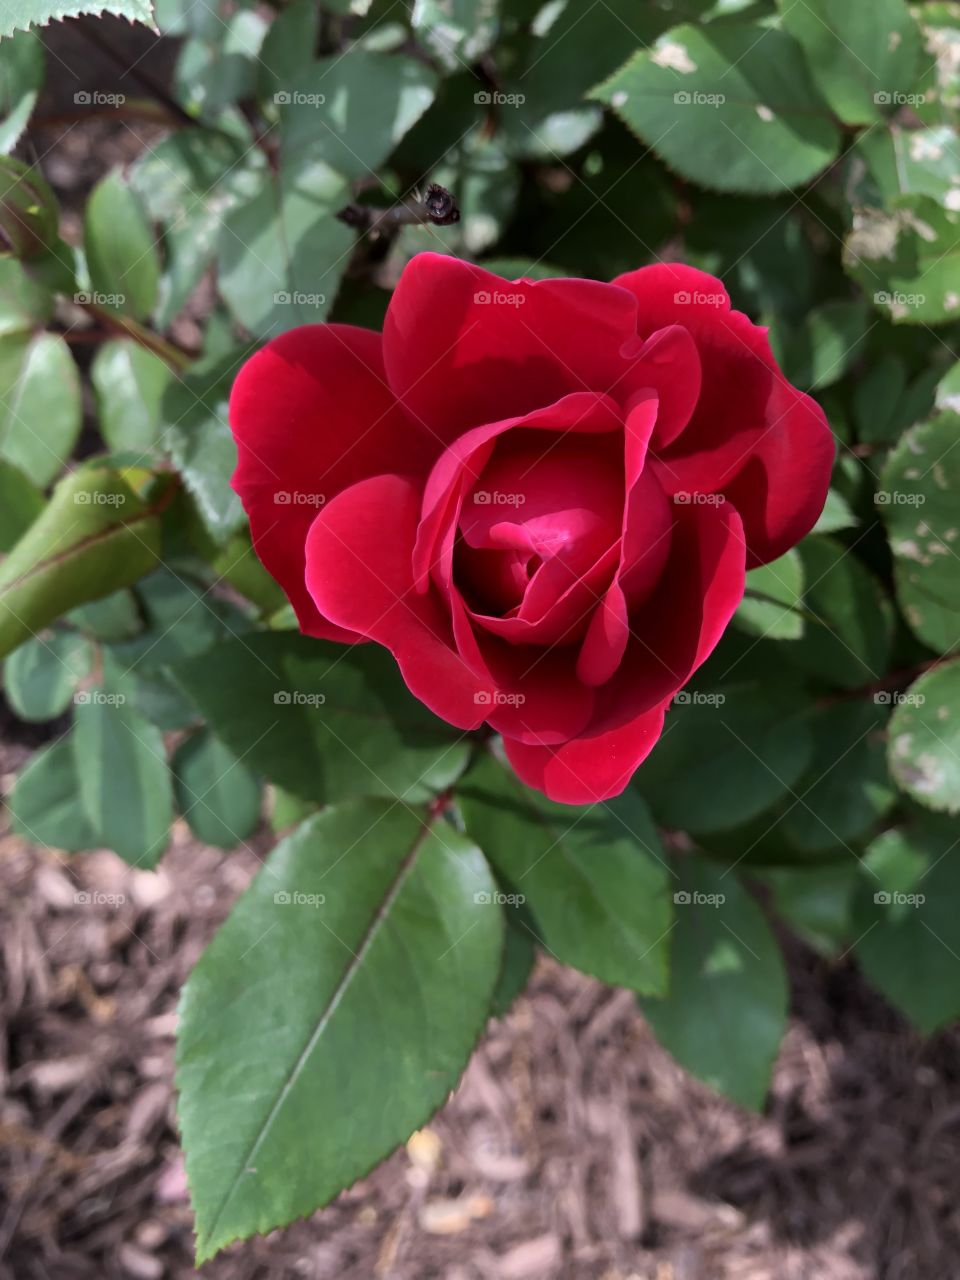 Red rose from an ornamental landscape planting. 